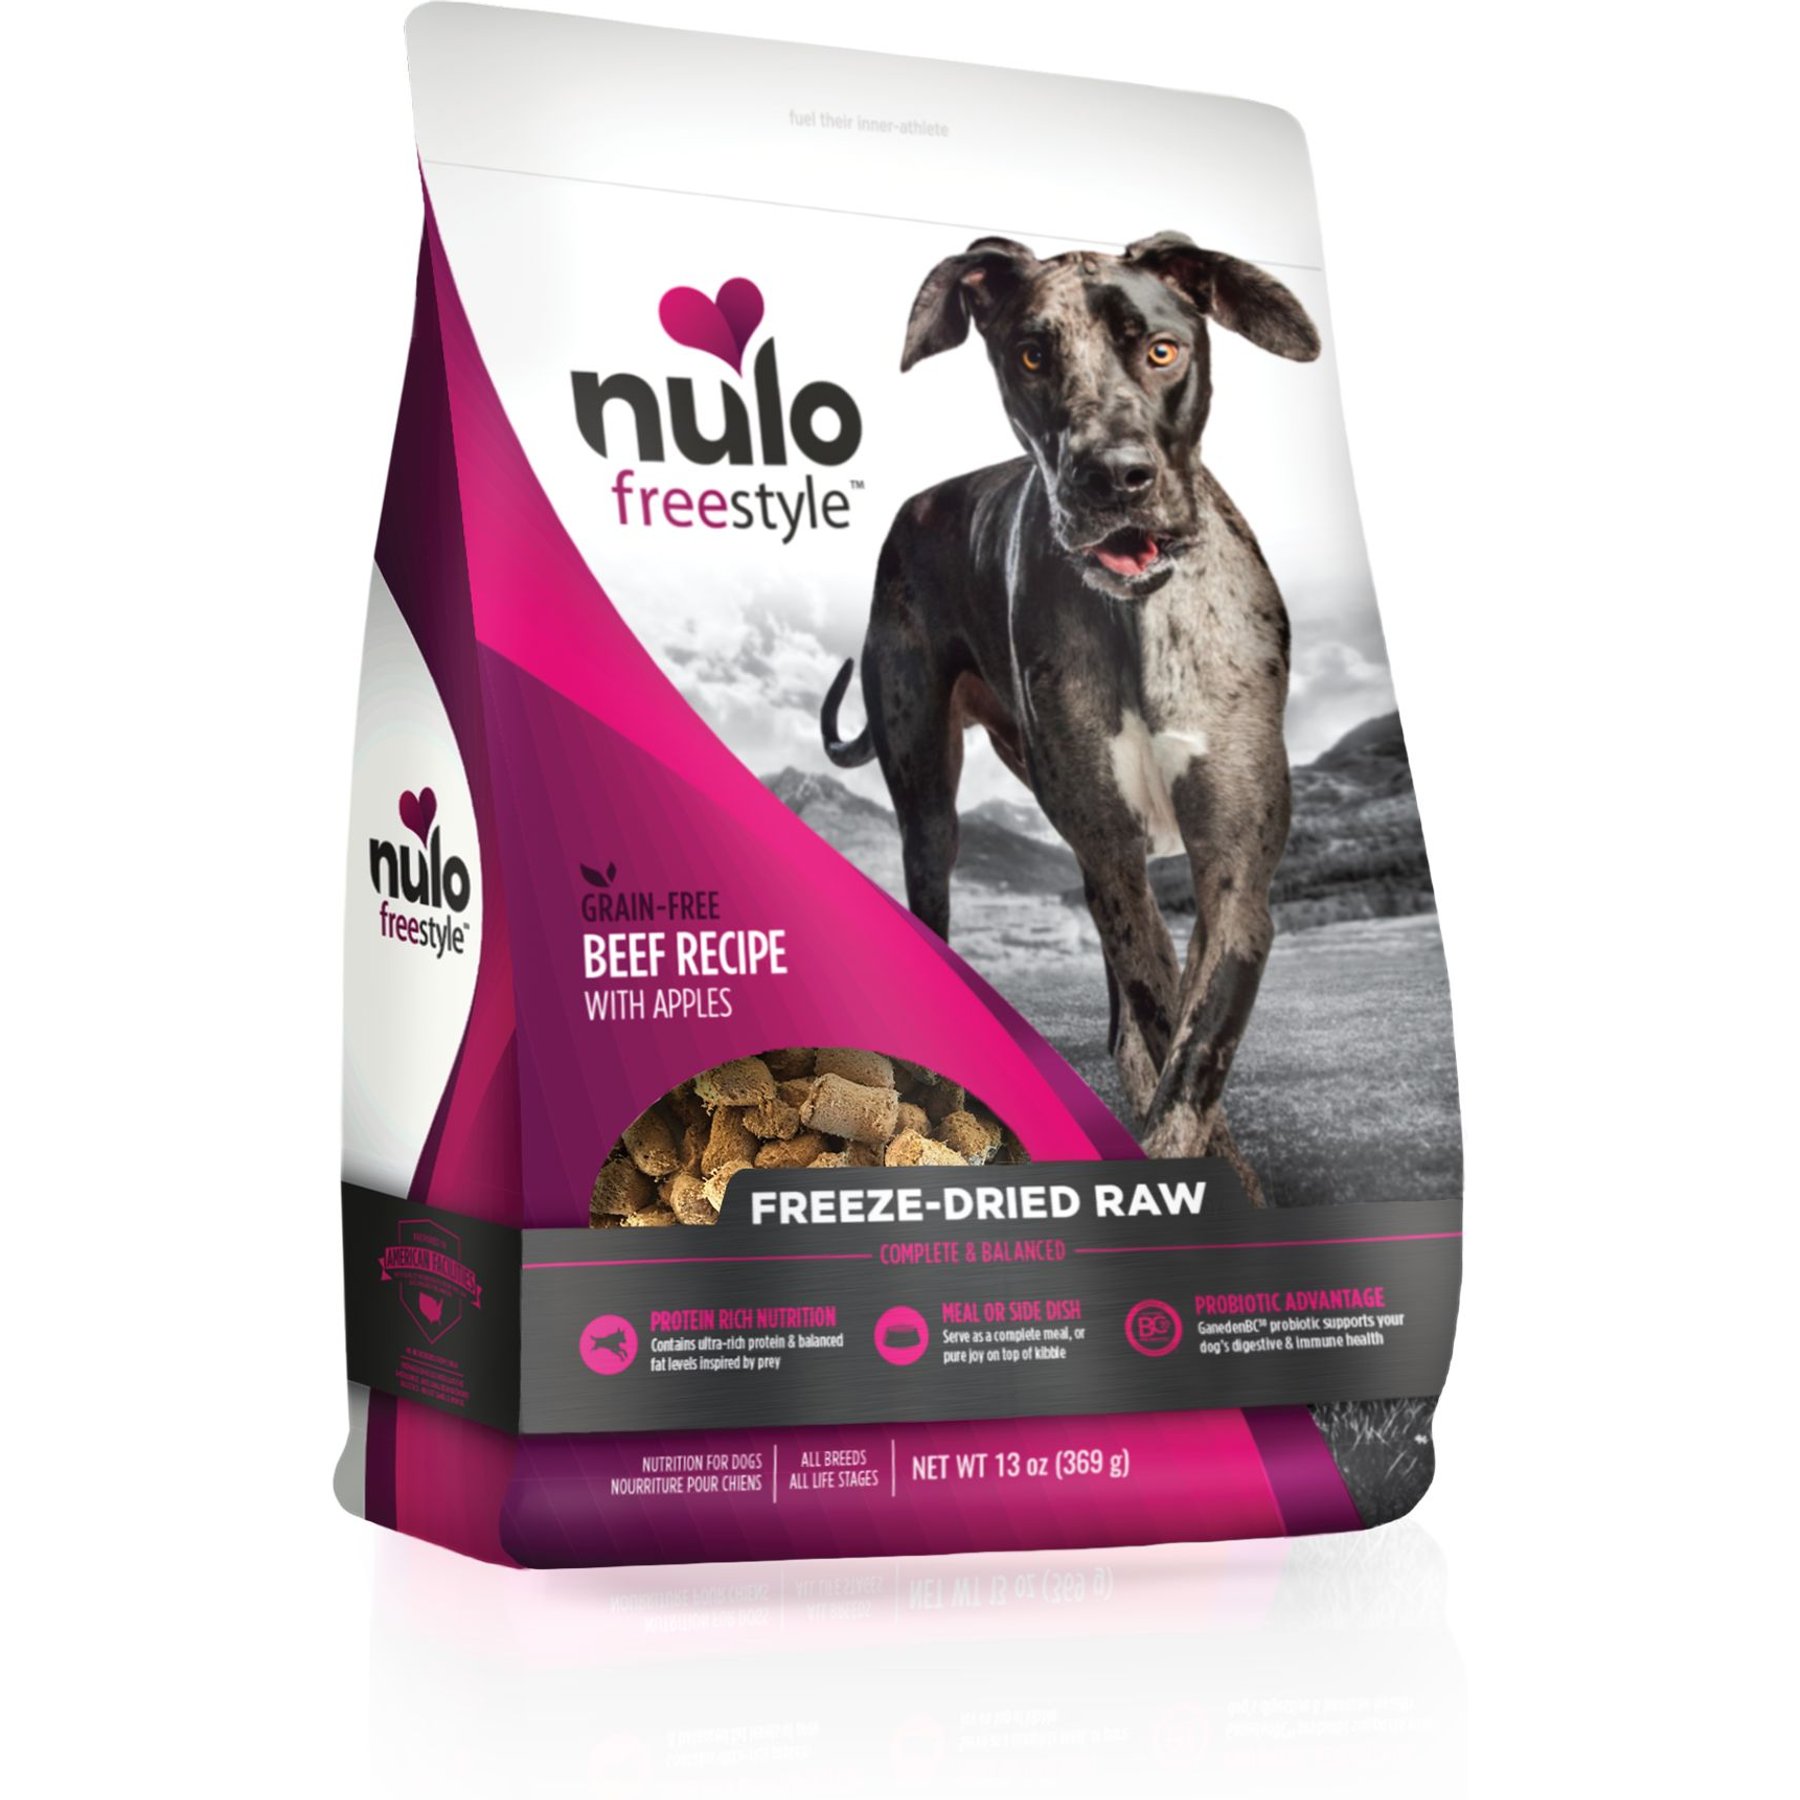 Nulo Freestyle Beef Recipe with Apples Grain-Free Freeze-Dried Raw Dog Food